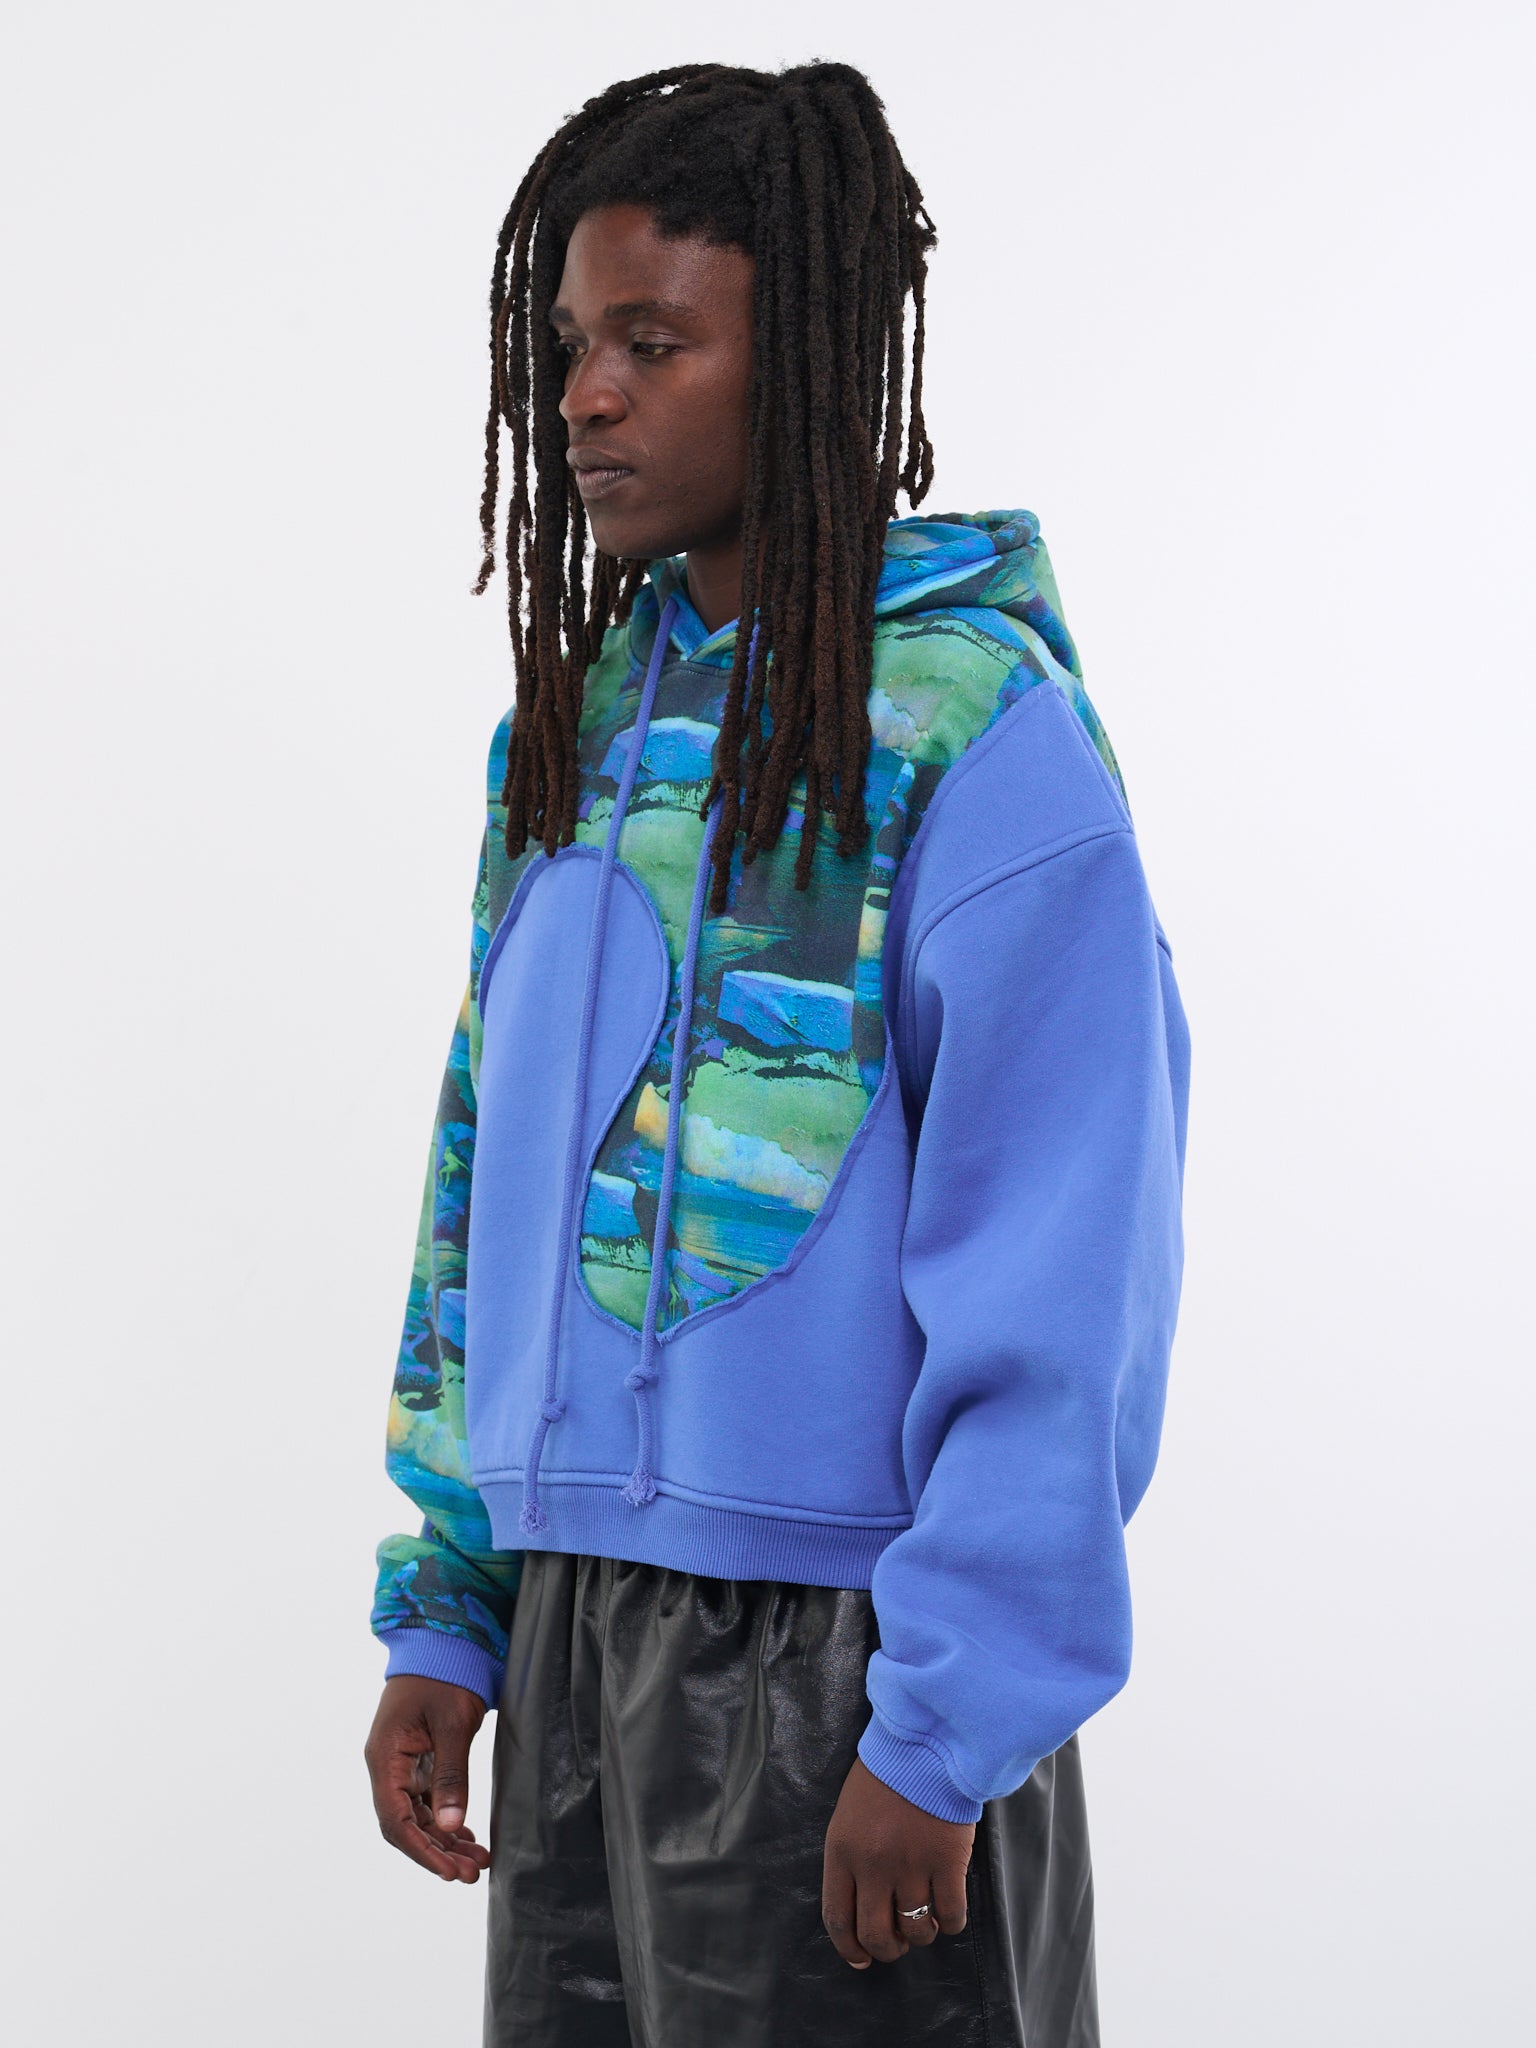 ERL Blue/fluo Green Hoodie for Men